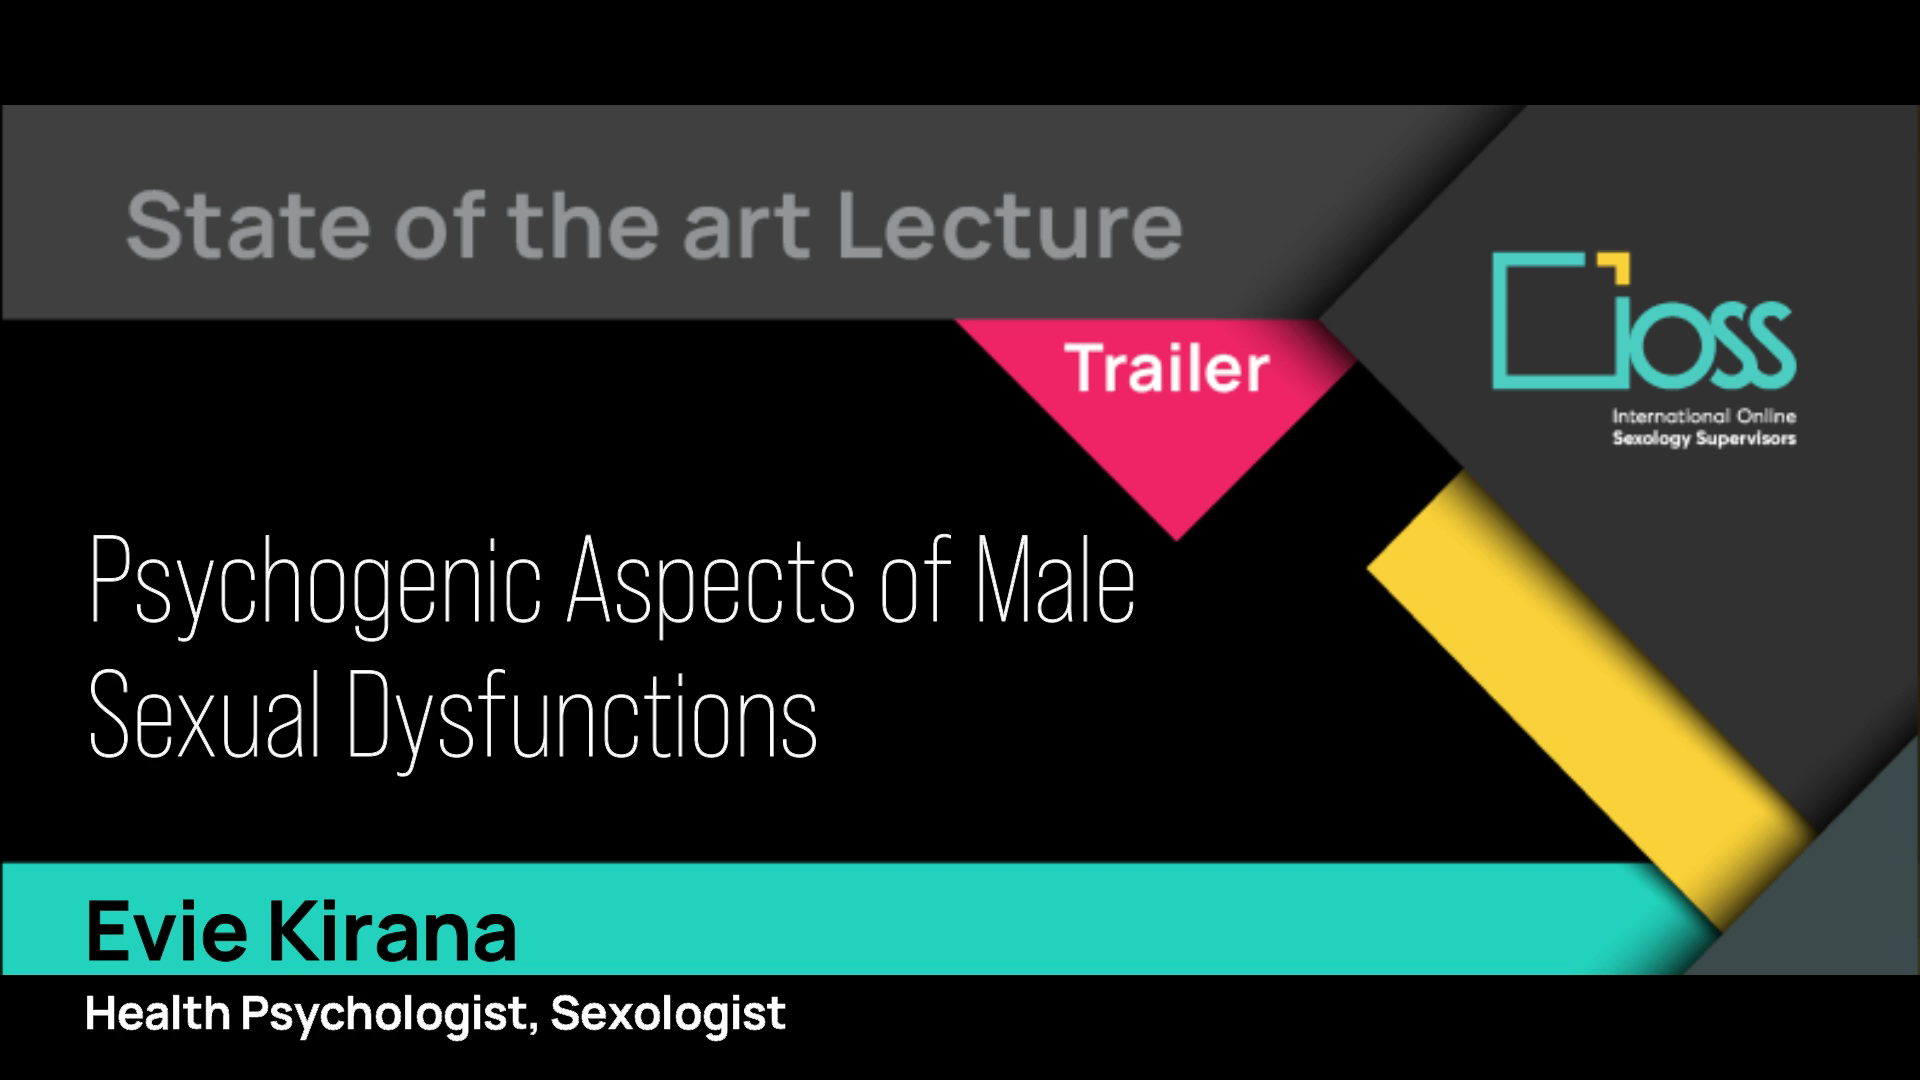 Trailer Psychogenic Aspects of Male Sexual Dysfunctions